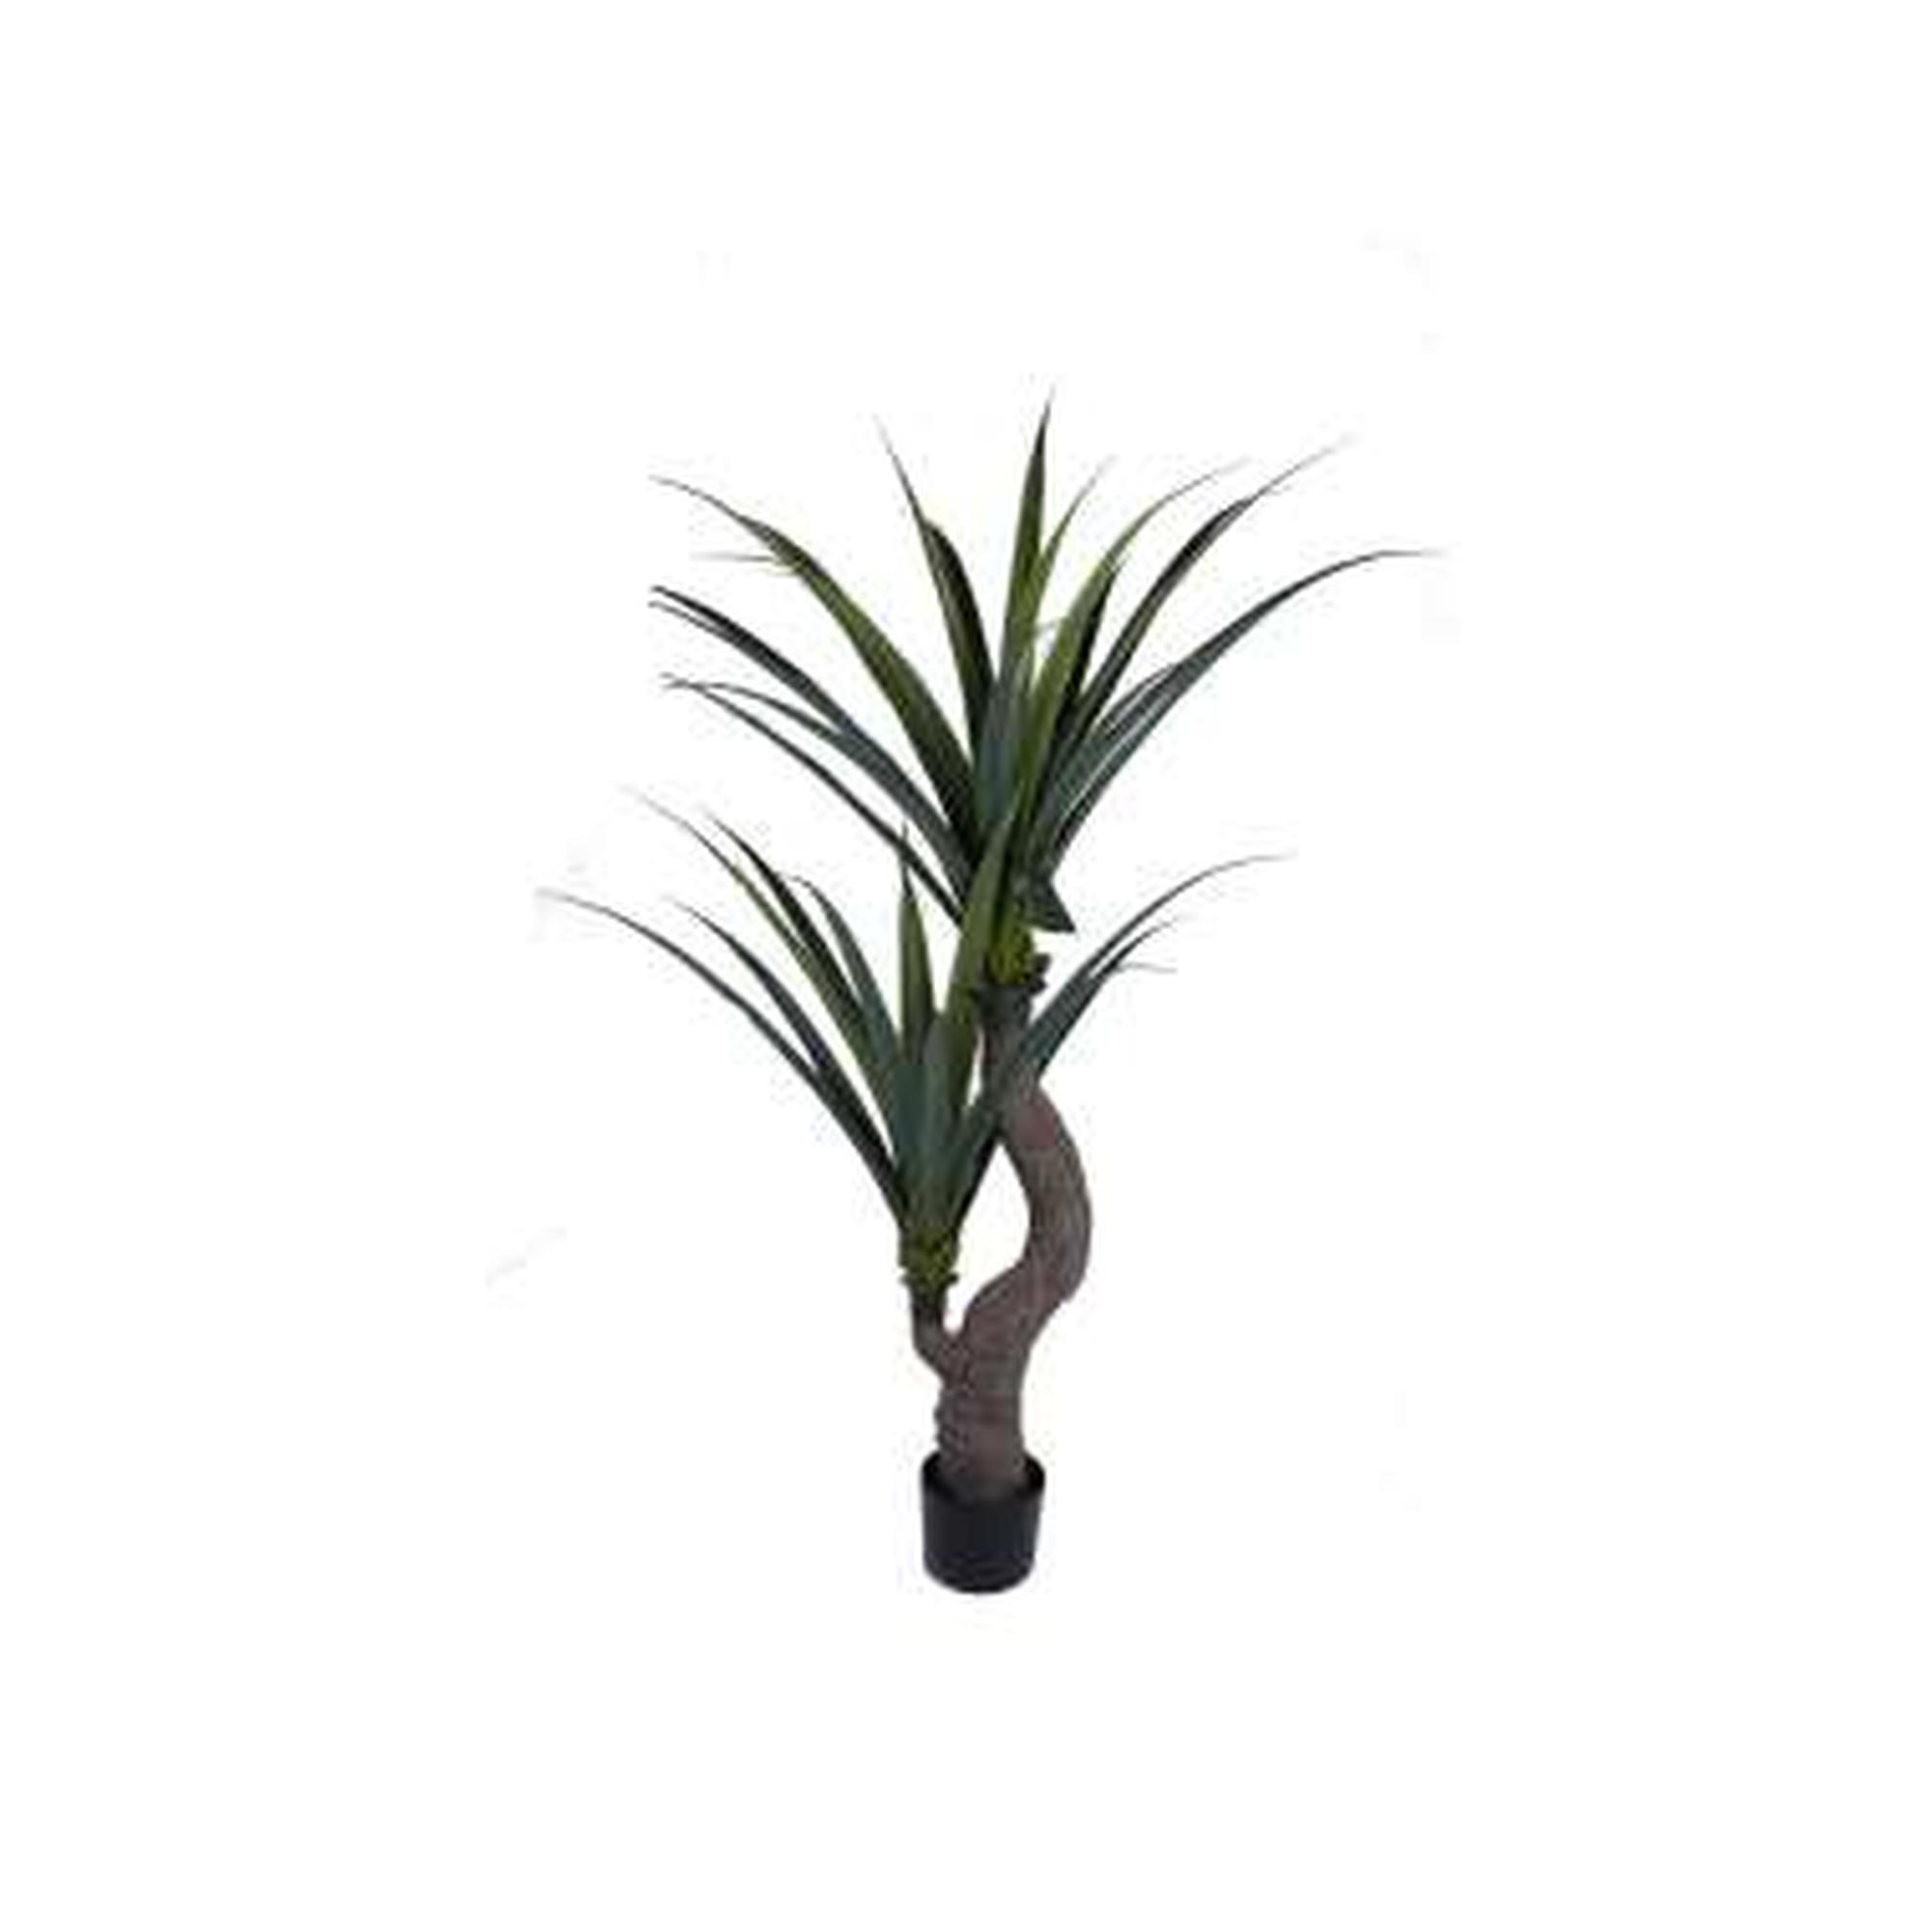 AGAVE C/POTE 160X90X150 - 592-460017